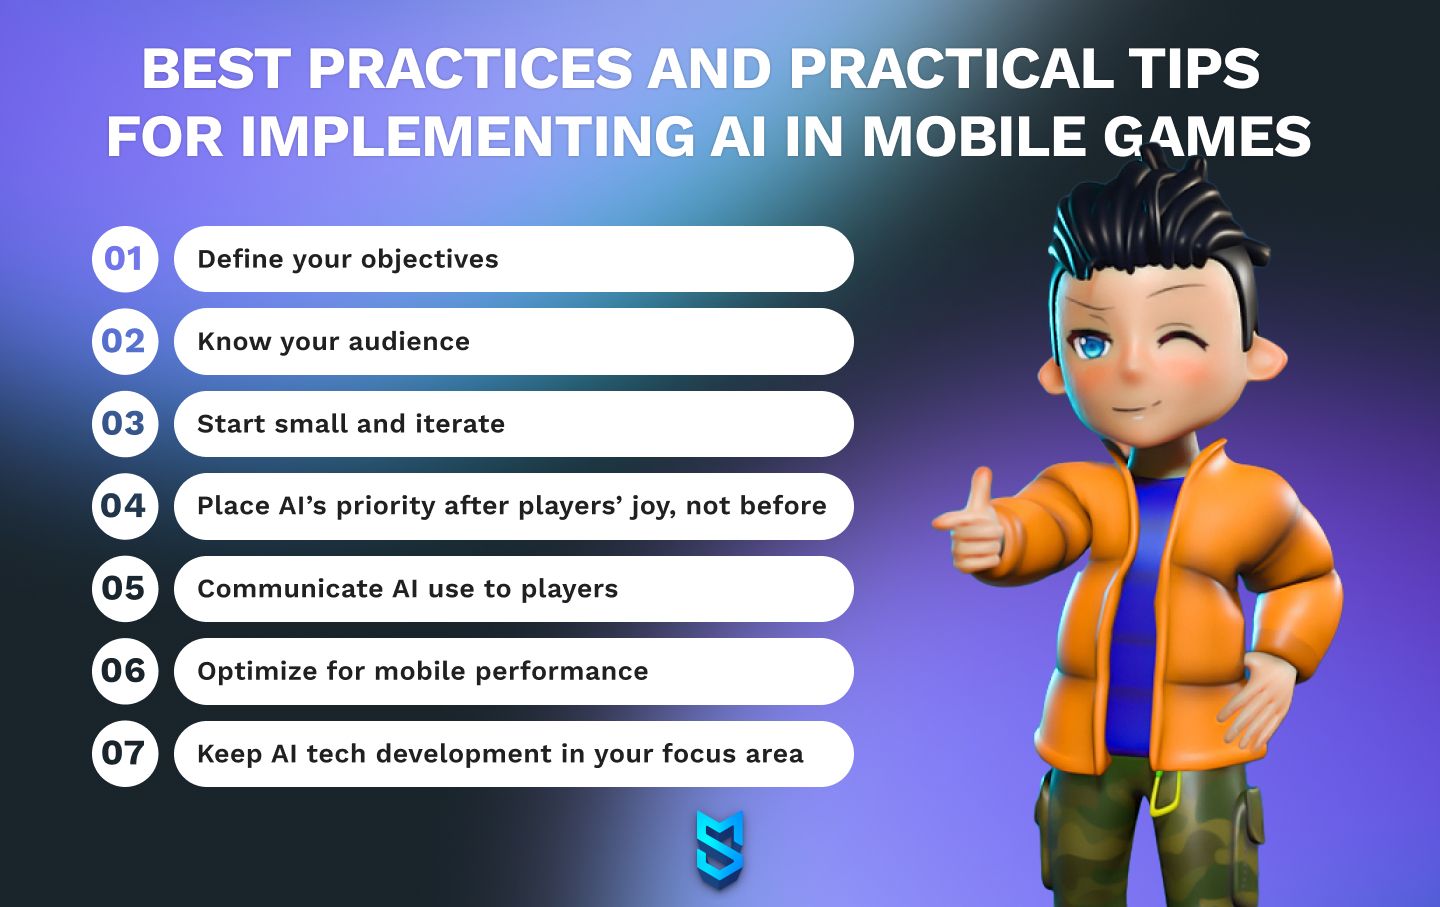 Best practices and practical tips for implementing AI in mobile games